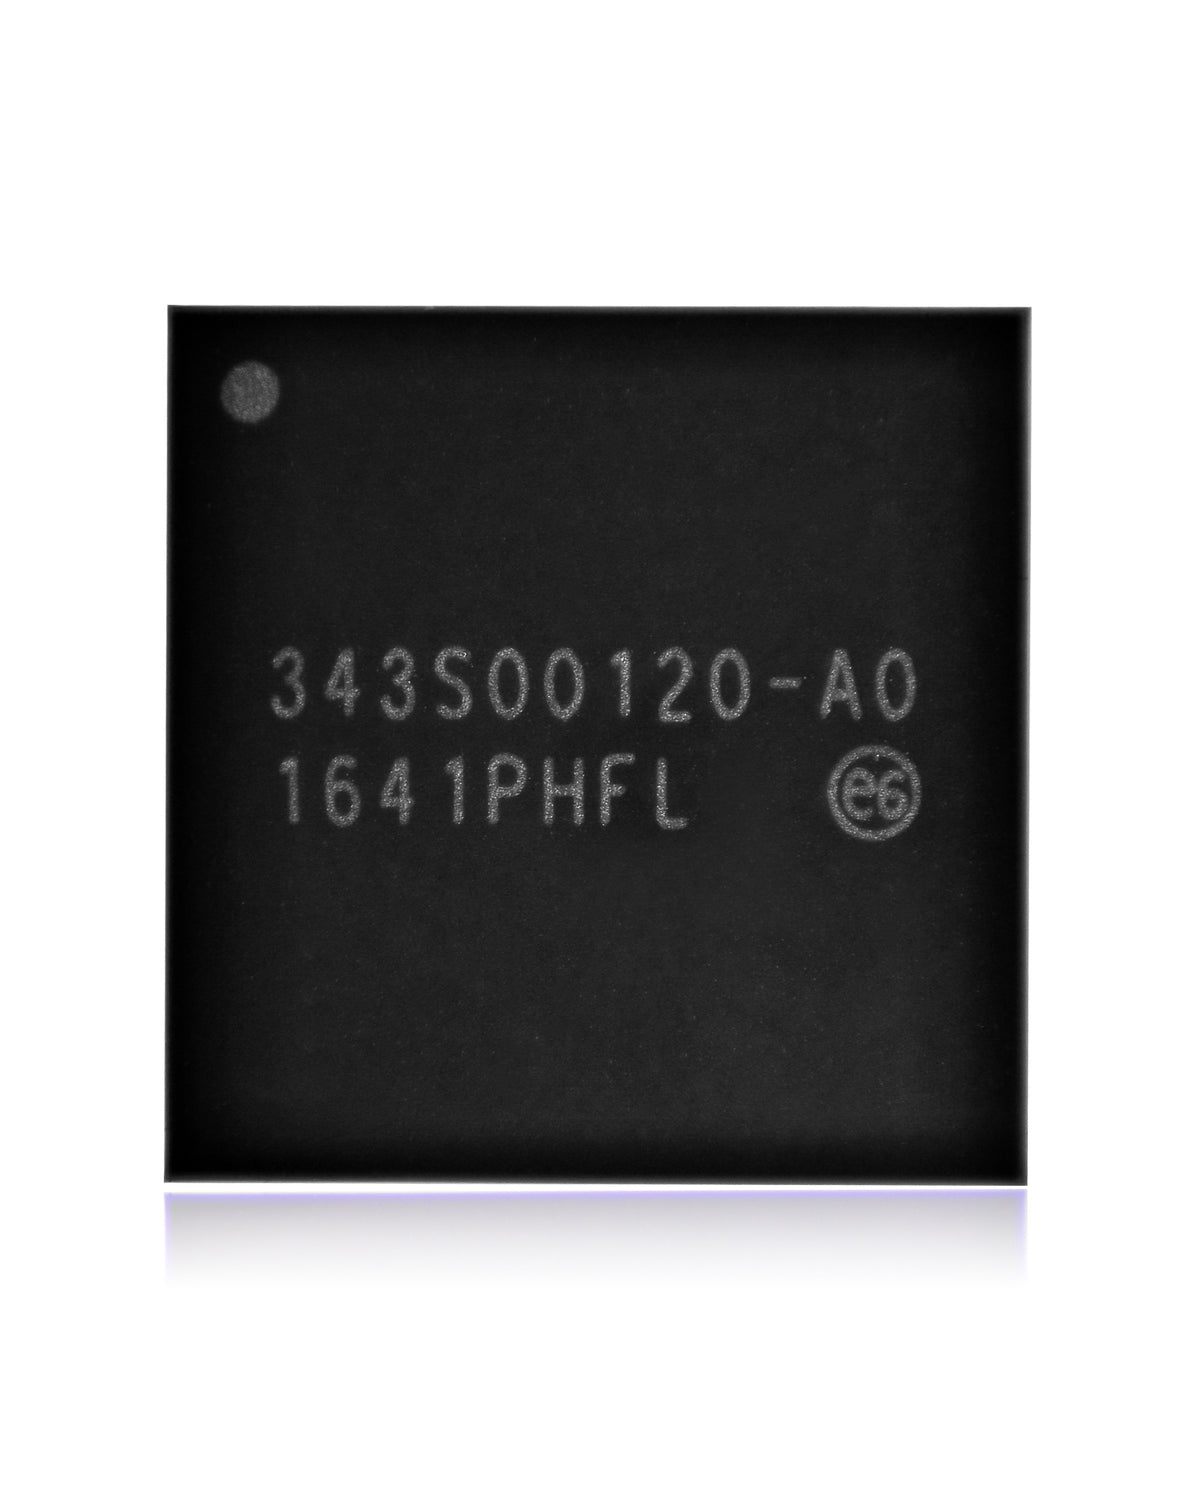 SMALL POWER IC FOR IPAD PRO 10.5" (343S00120)